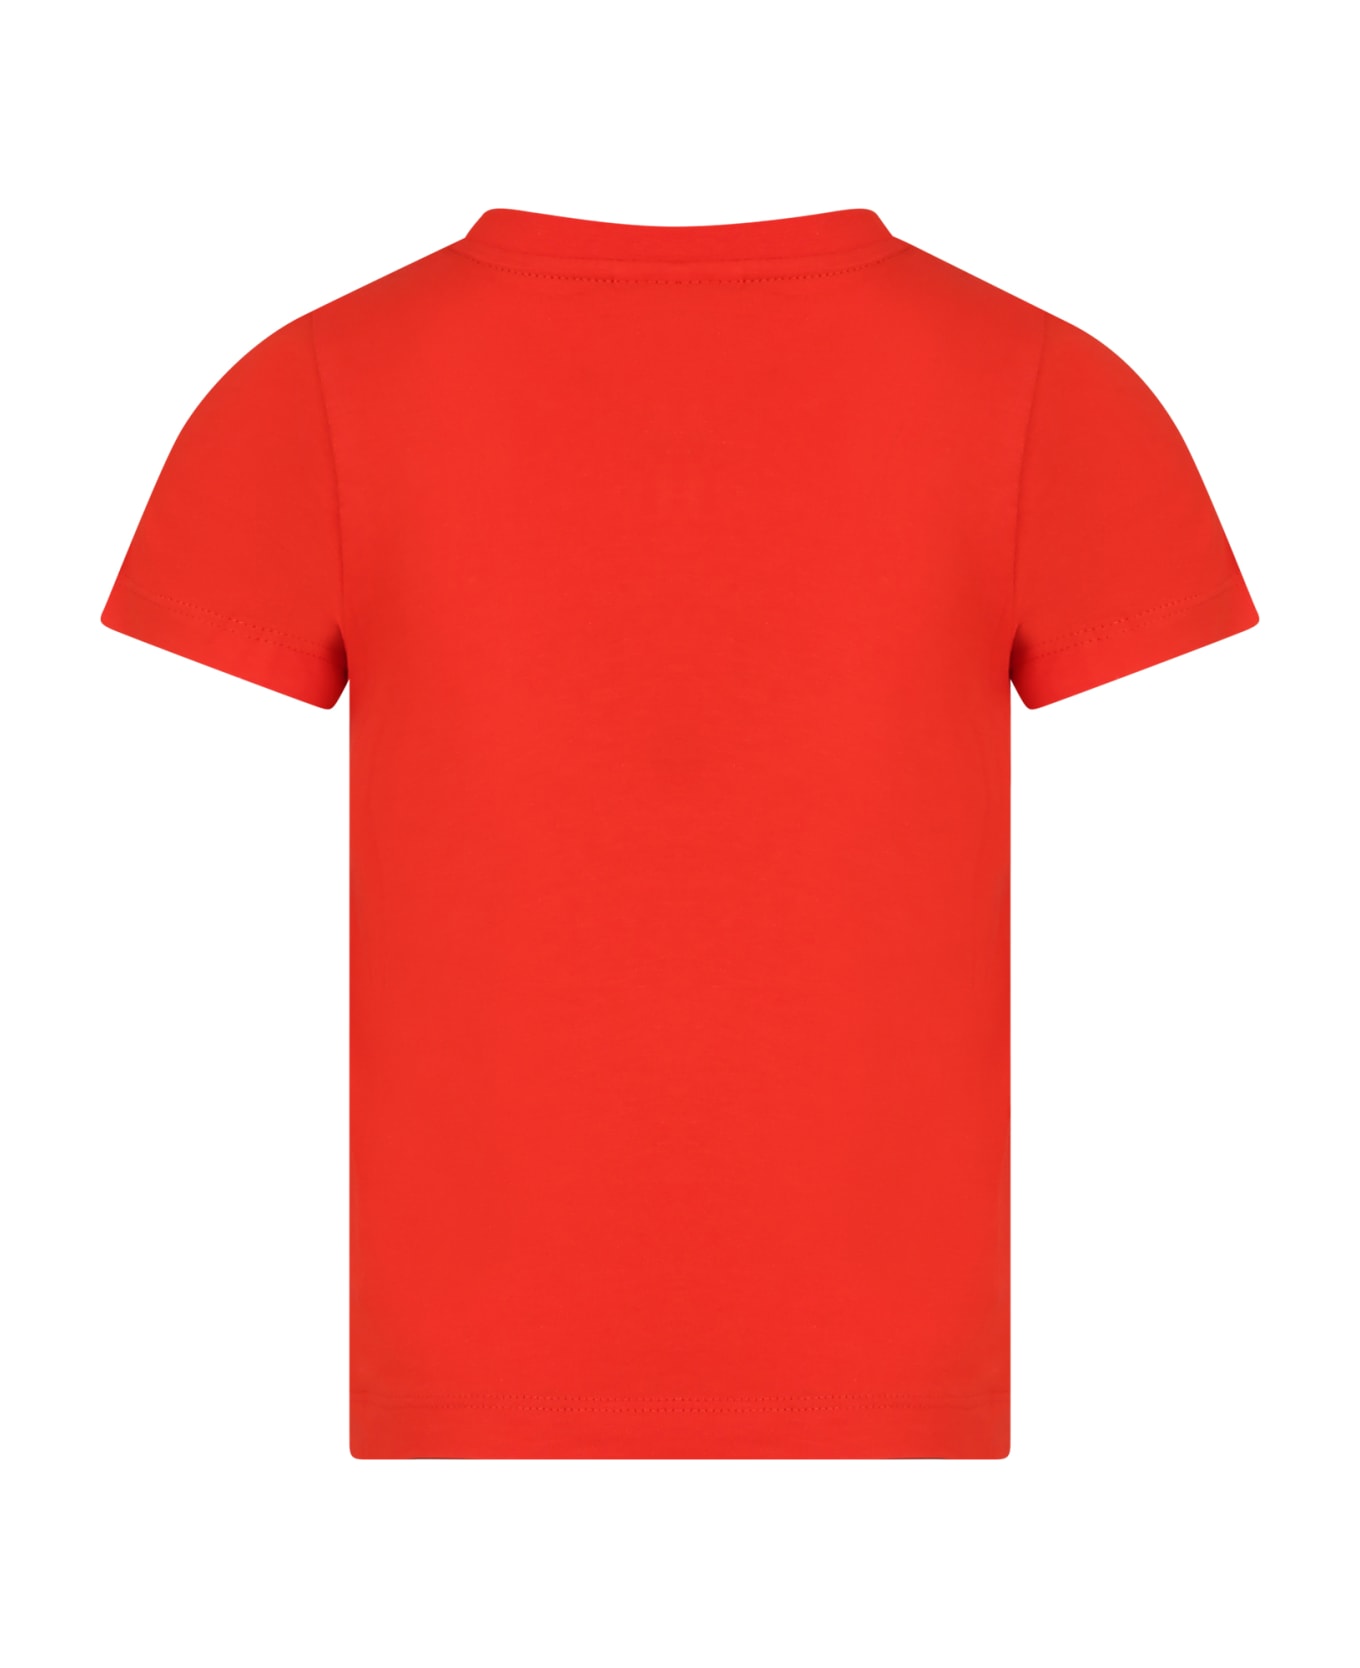 Lacoste Red T-shirt For Boy With Crocodile - Red Tシャツ＆ポロシャツ